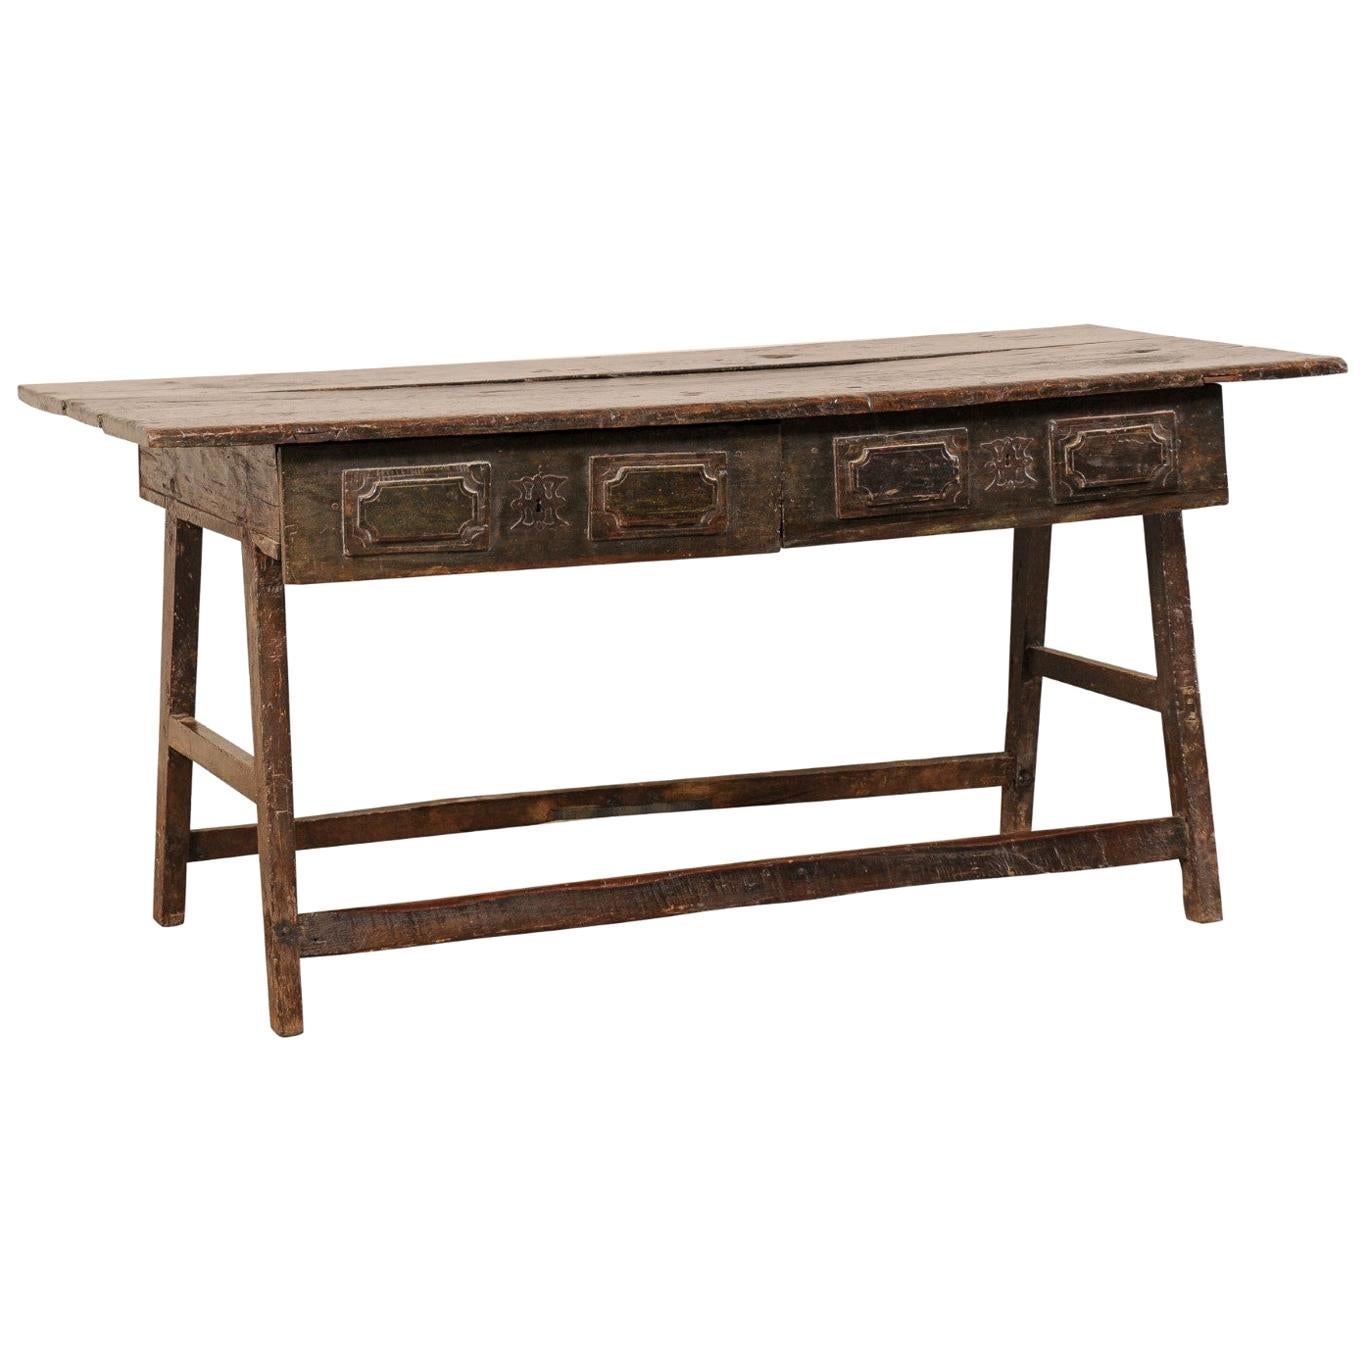 Late 17th C. Brazilian Peroba Wood Console Table w/Drawers & Sawhorse Style Legs For Sale